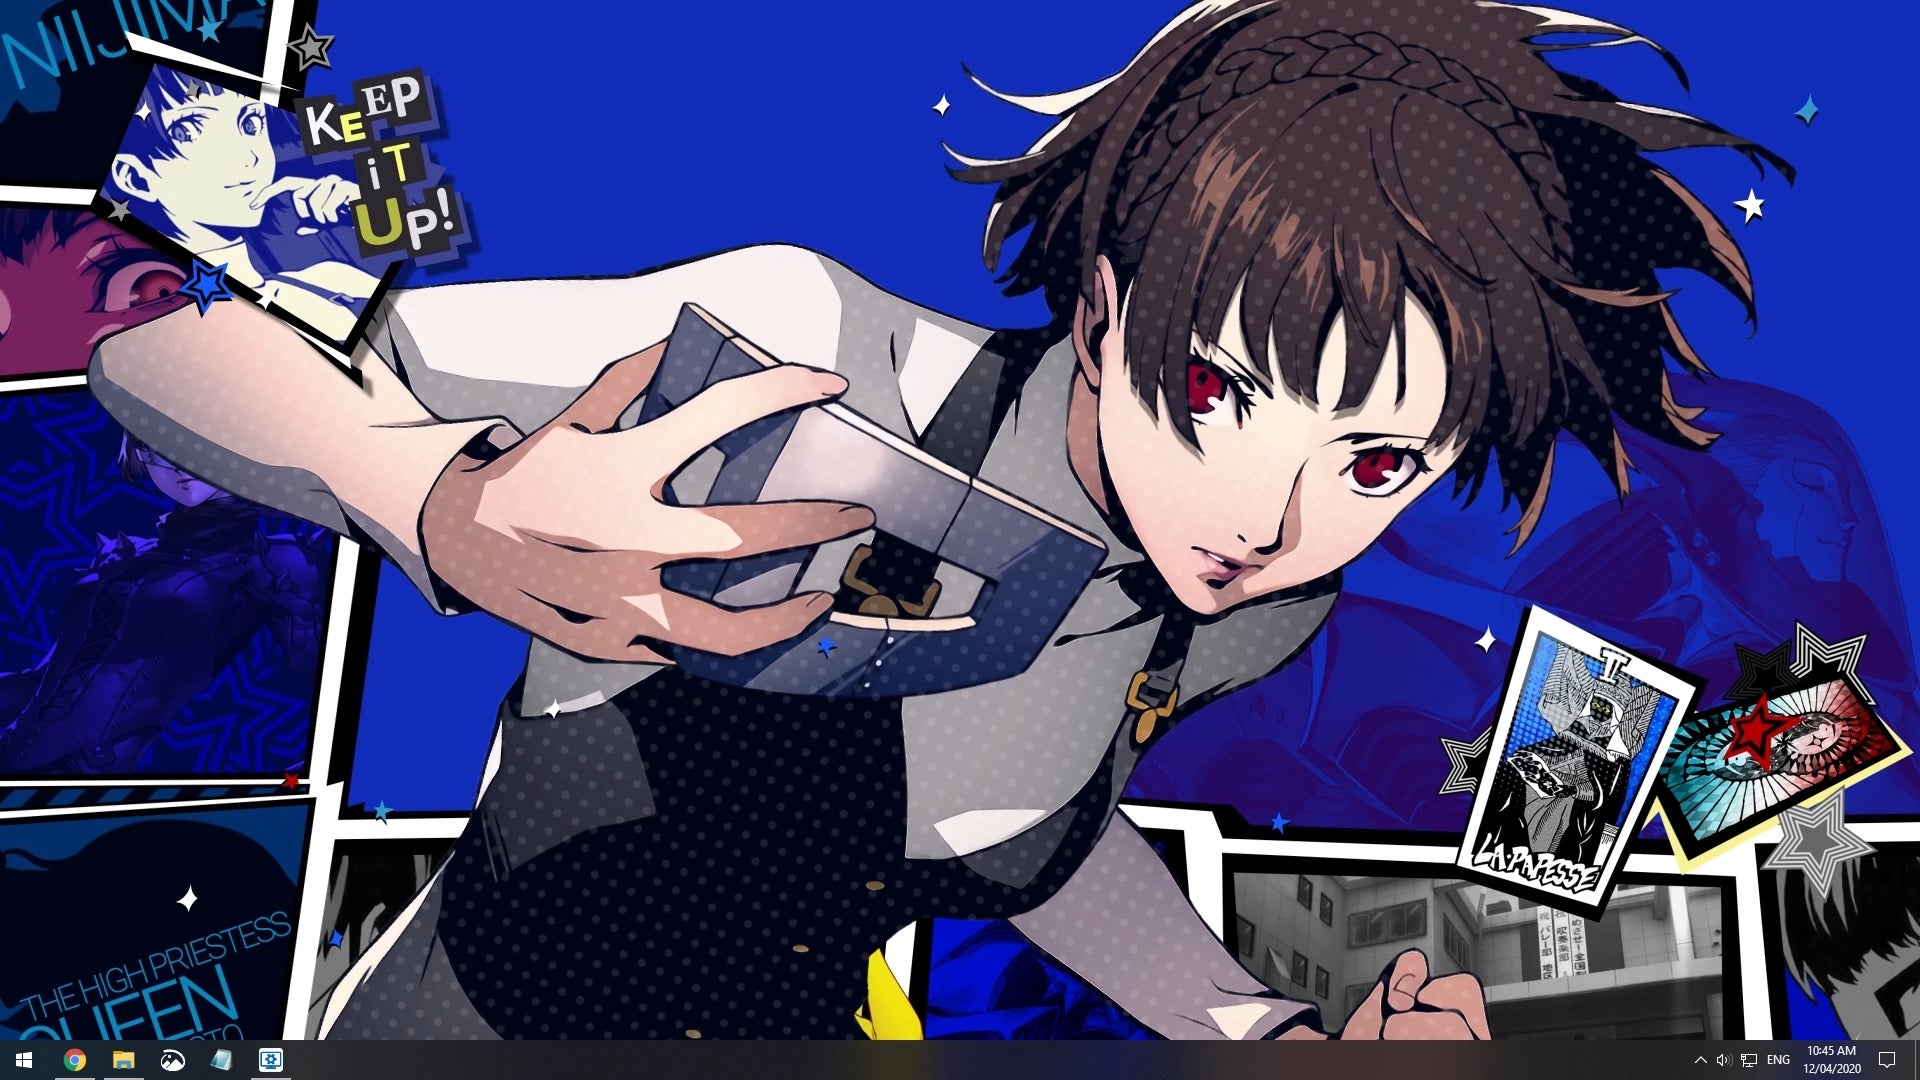 I Tried Recreating And Animating The P5r Makoto Ps4 Theme For